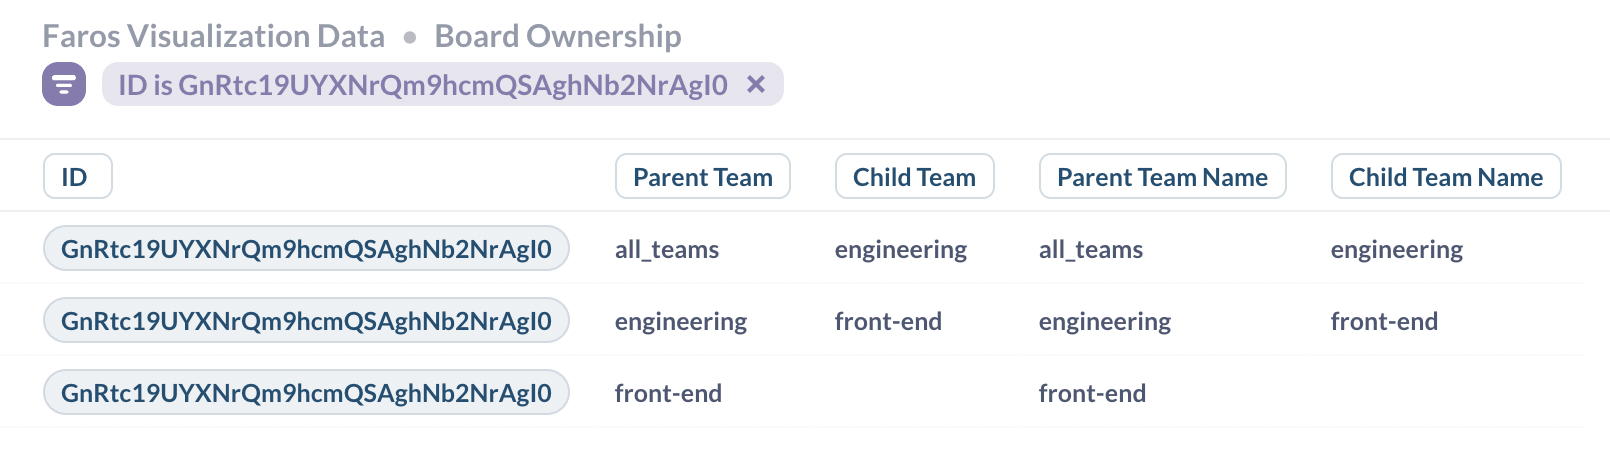 Example:  a board added to the "front-end" team in the UI has three records in the "Board Ownership" table